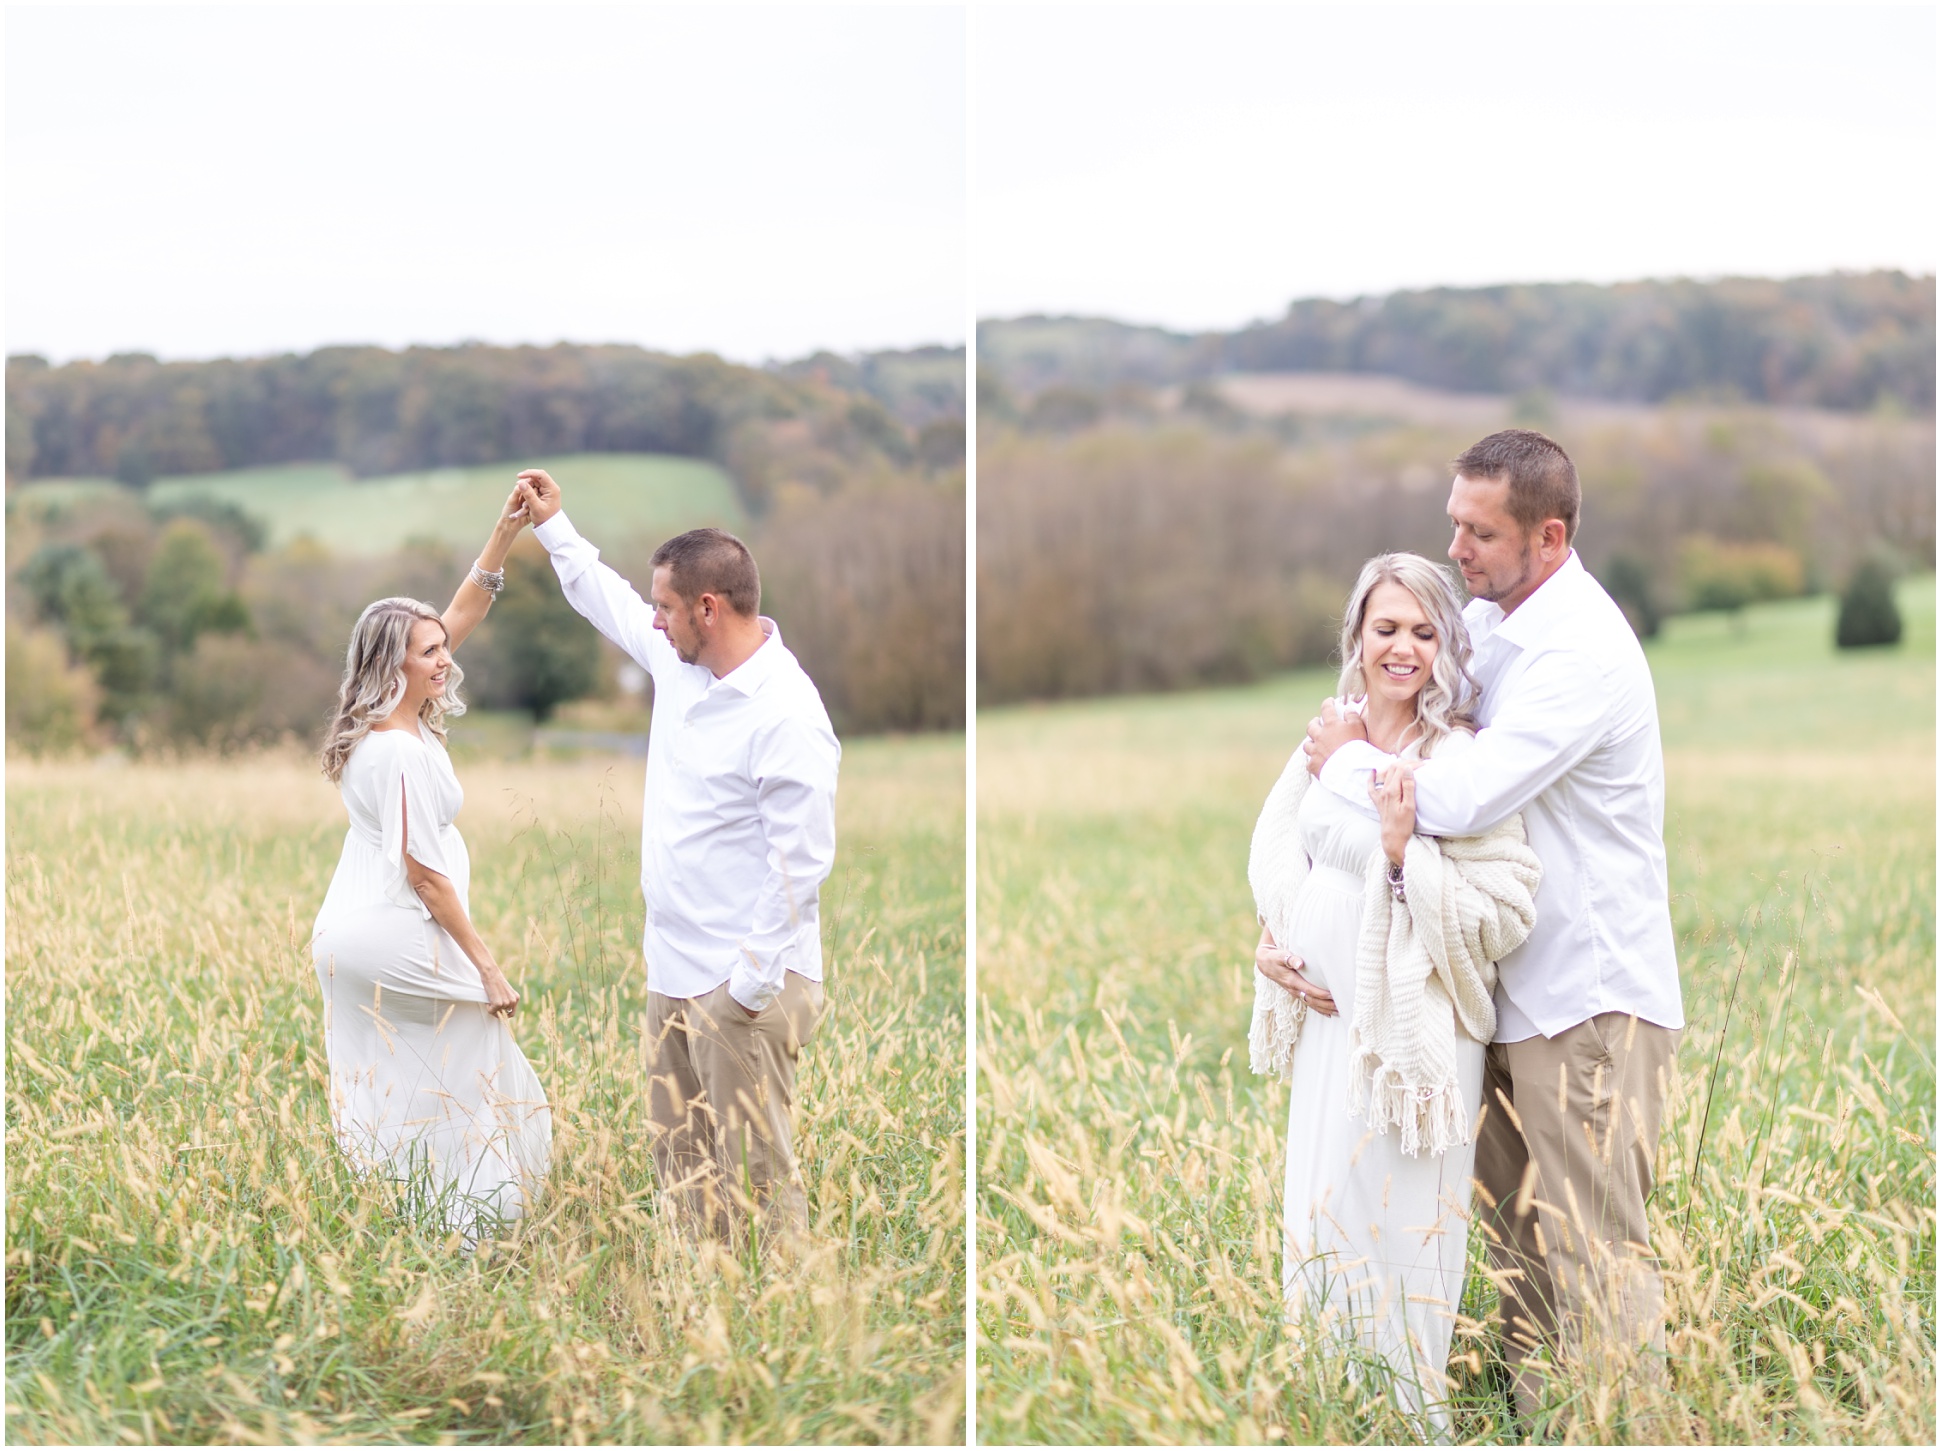 Two images of Rebecca and Scott dancing and swaying during their maternity session